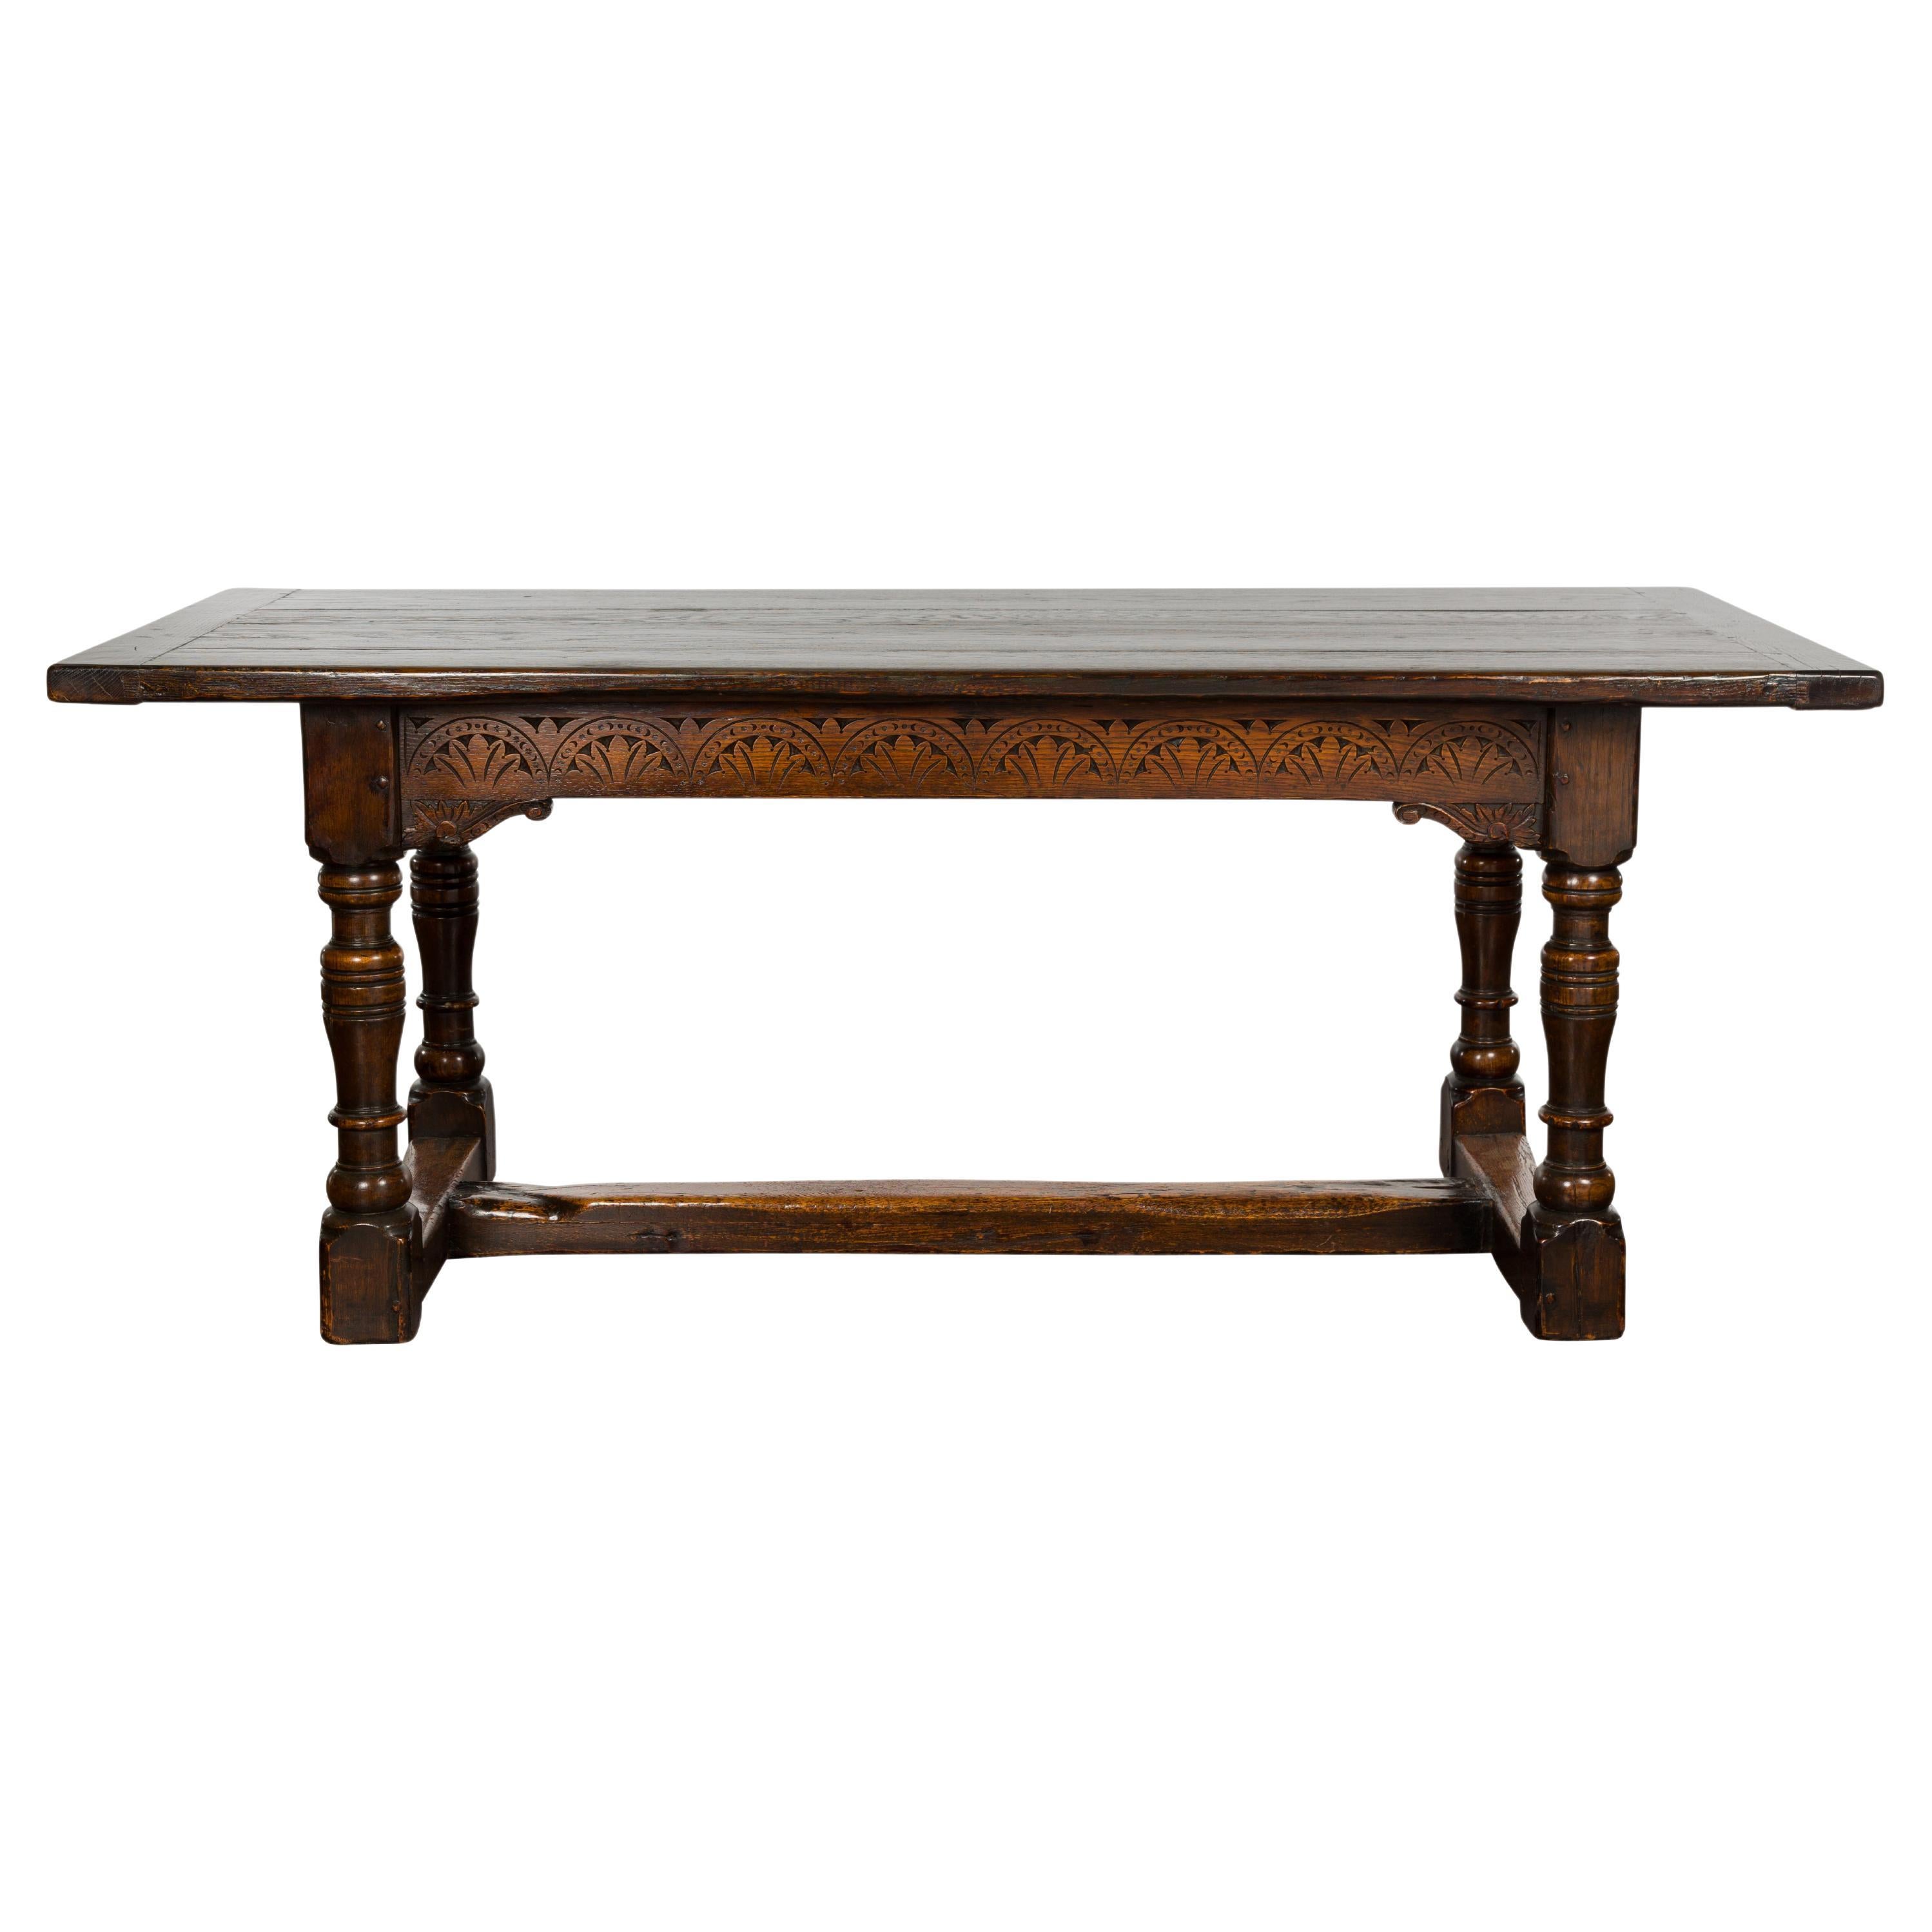 19th Century English Oak Table with Carved Apron and Turned Legs For Sale